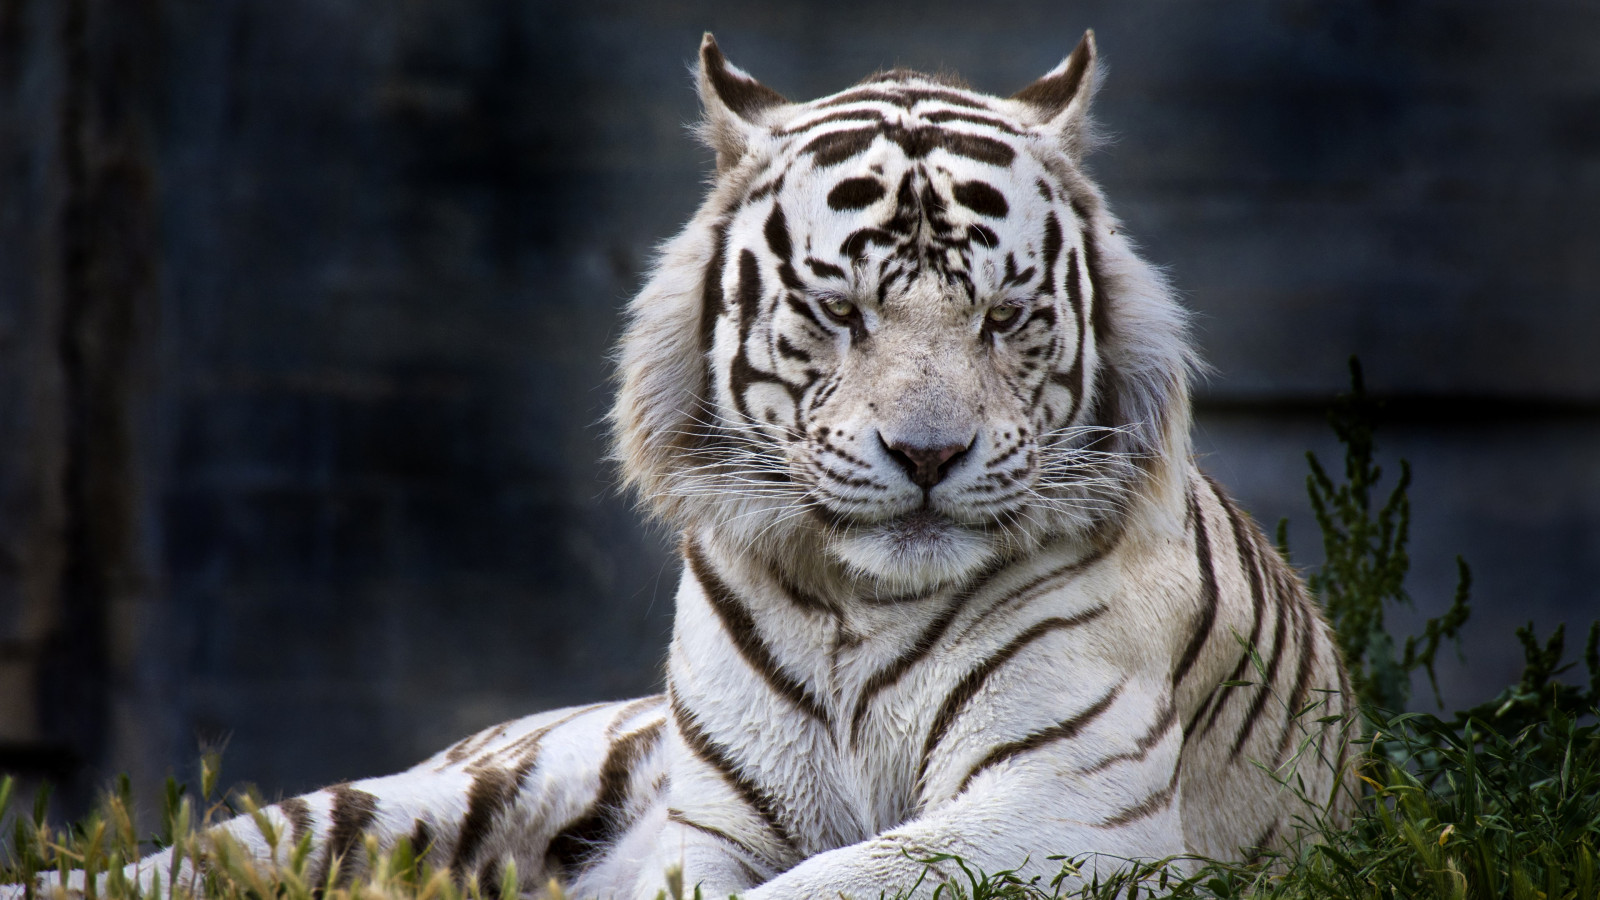 The white tiger from Madrid Zoo wallpaper 1600x900